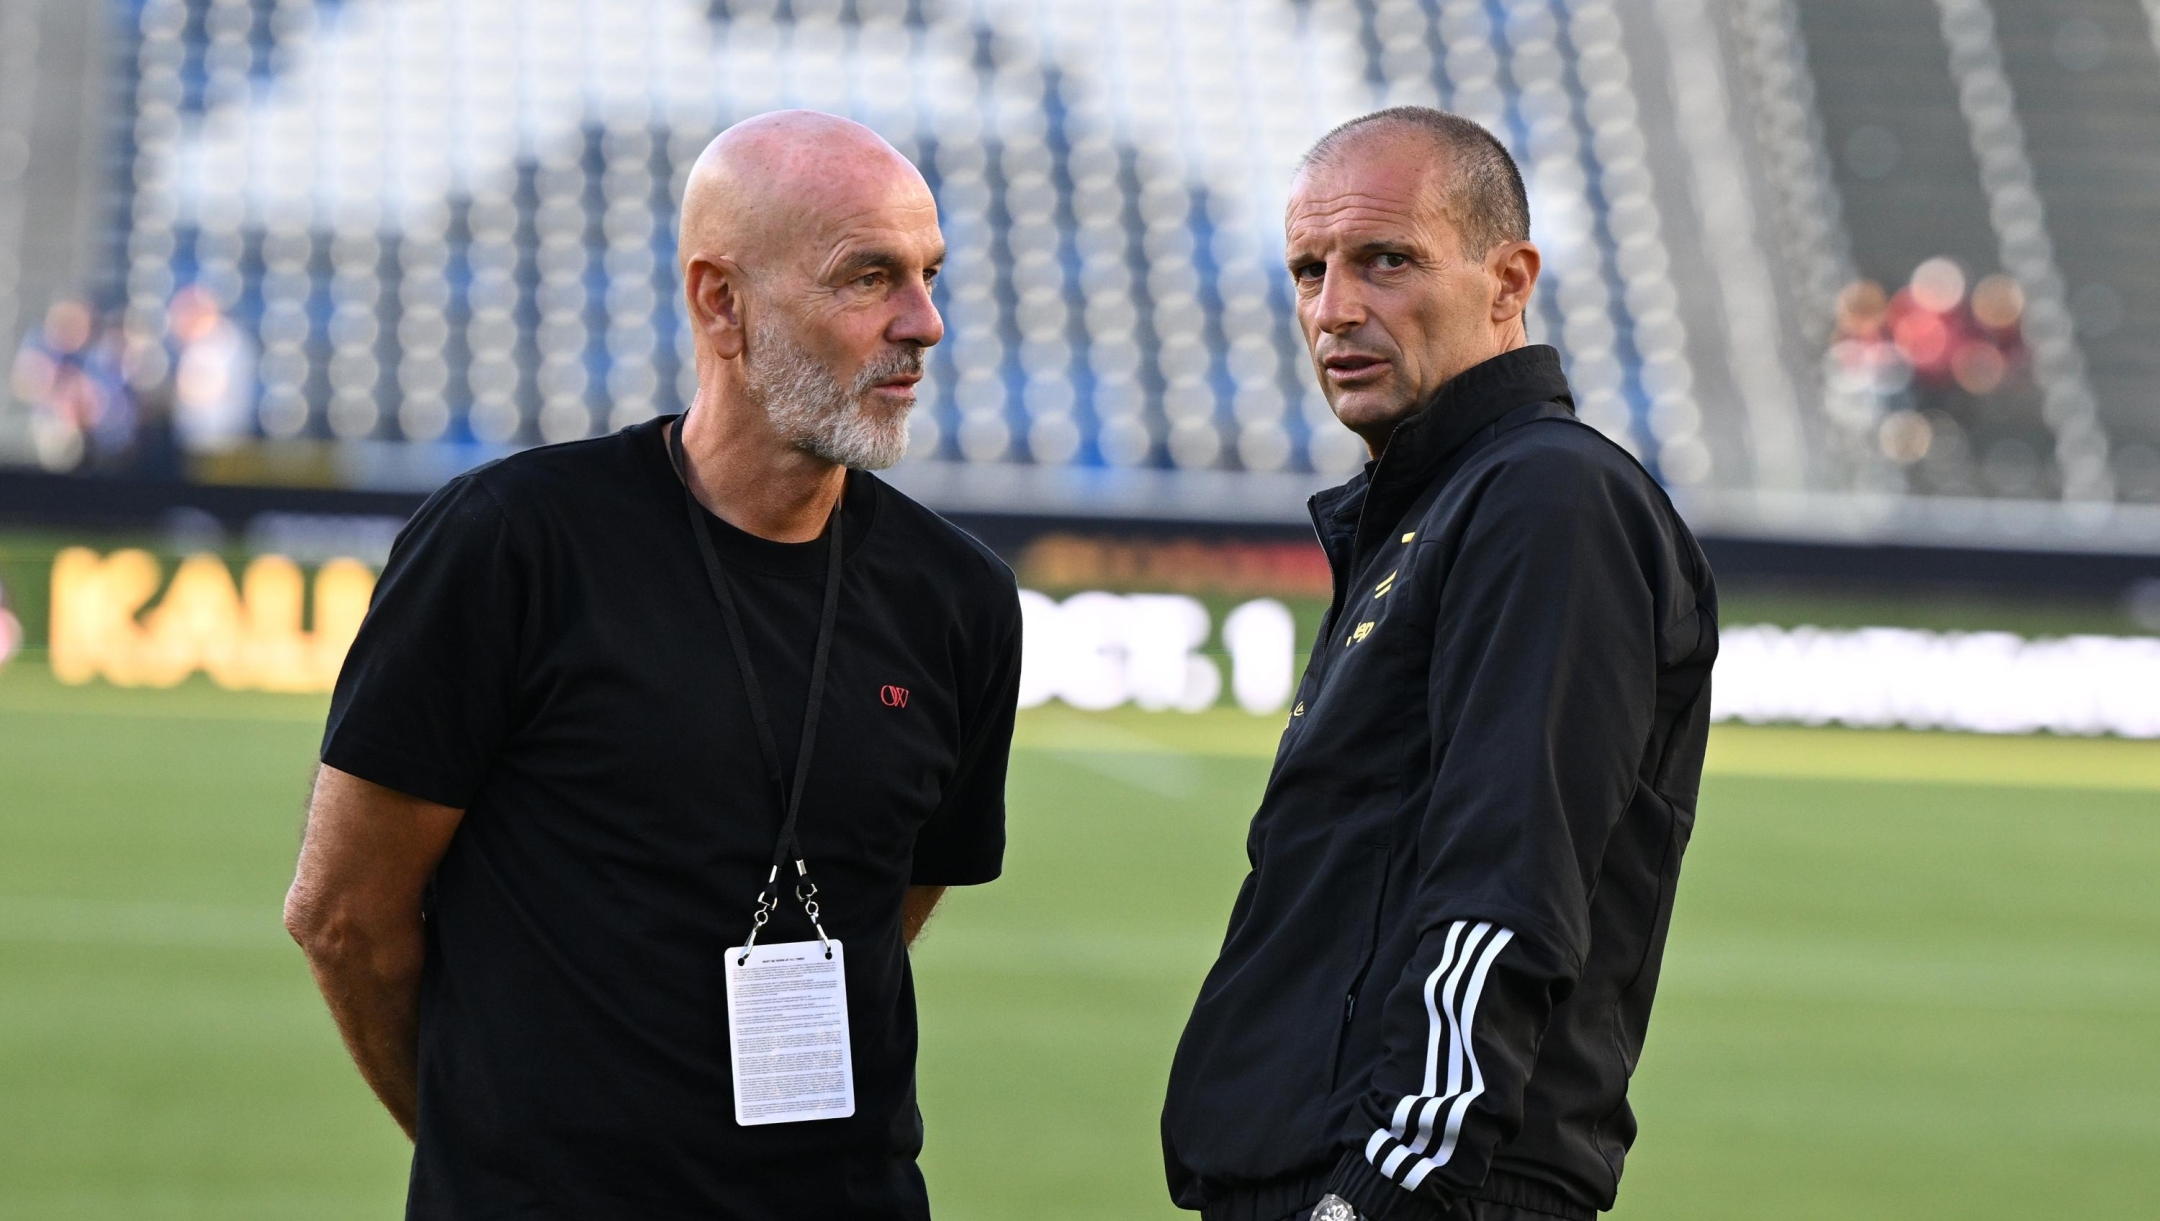 CARSON, CALIFORNIA - JULY 27:  AC Milan Head Coach Stefano Pioli talks to Juventus Head Coach Massimiliano Allegri of Juventus prior to the Pre-Season Friendly match between Juventus and AC Milan at Dignity Health Sports Park on July 27, 2023 in Carson, California. (Photo by Claudio Villa/AC Milan via Getty Images)